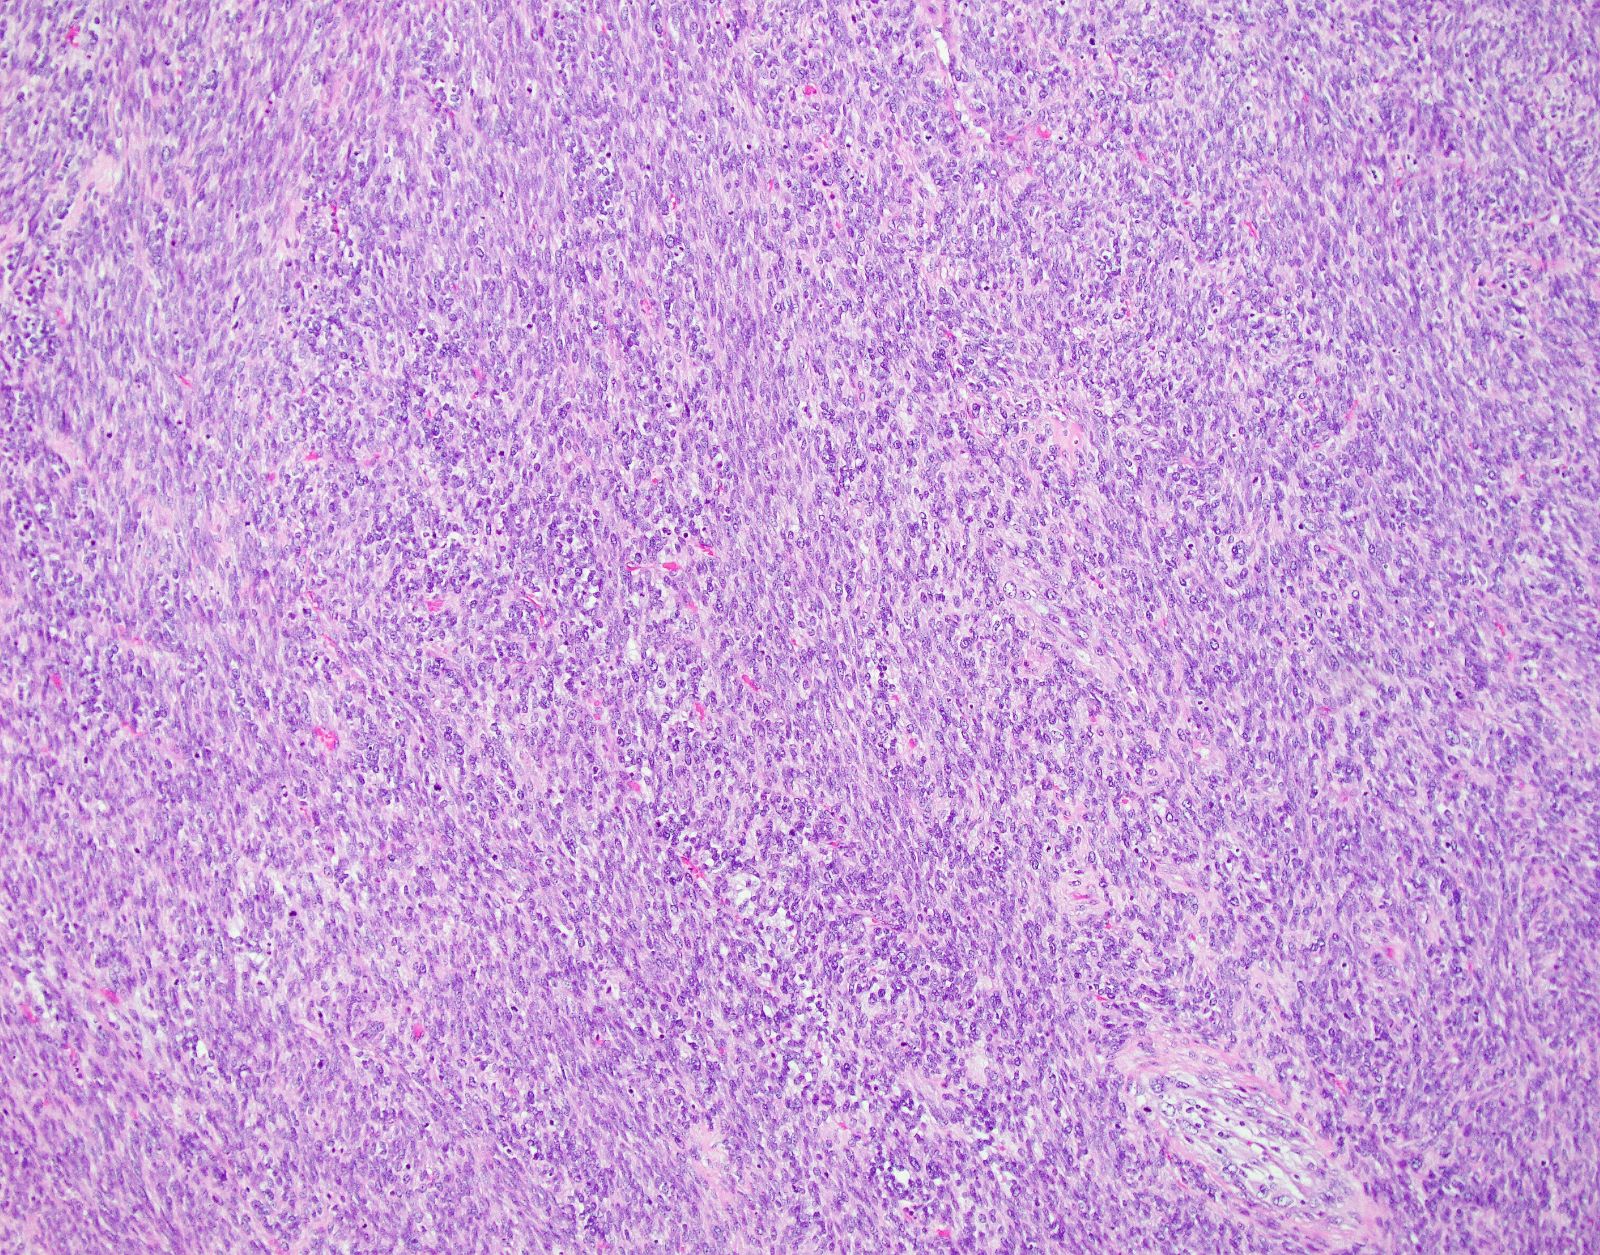 Spindle cell leiomyosarcoma